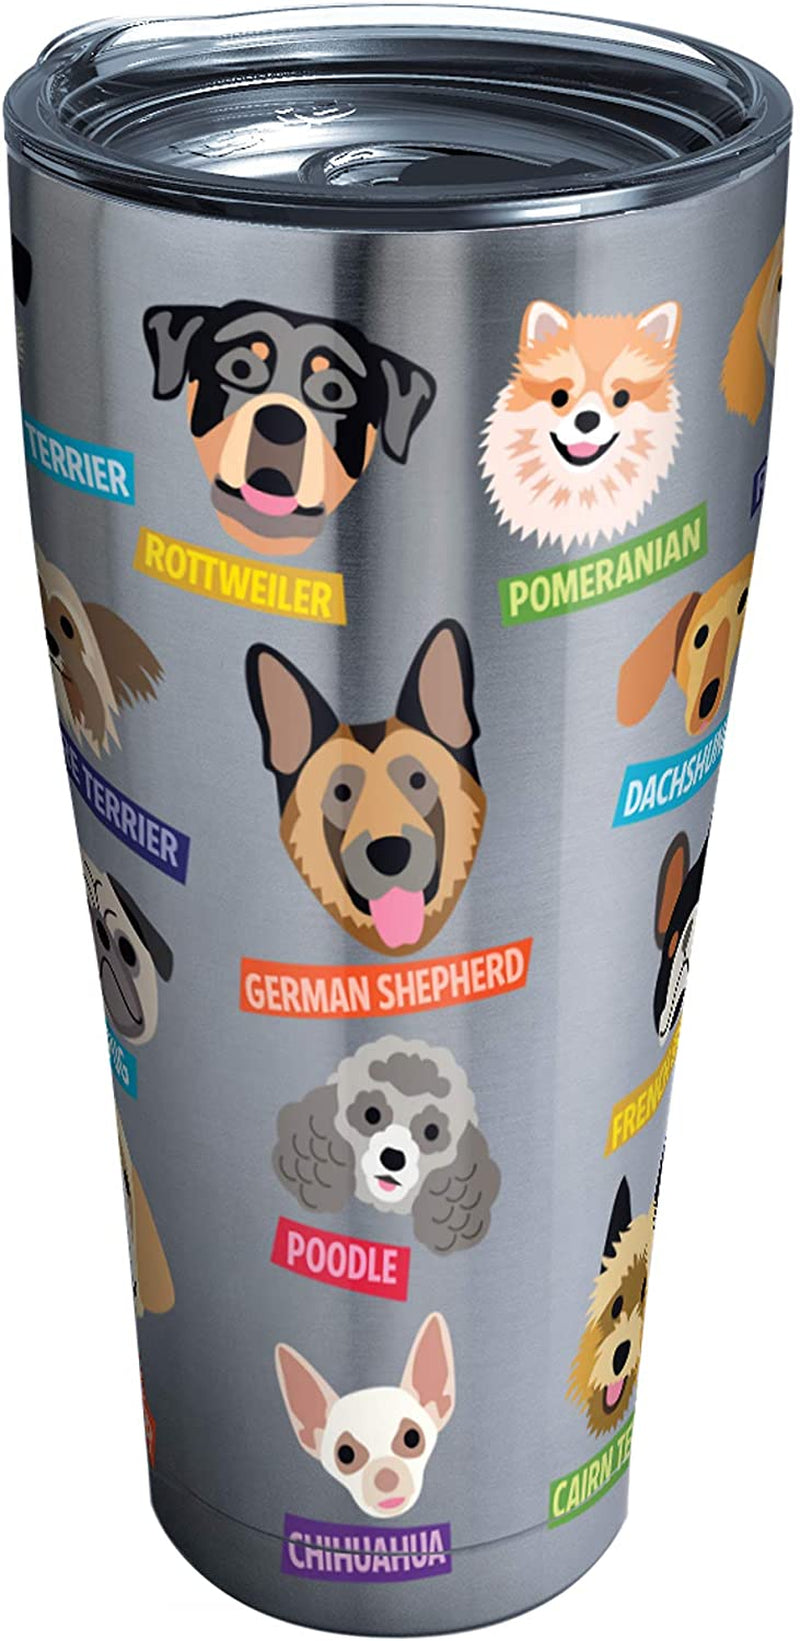 Tervis Flat Art - Dogs Made in USA Double Walled Insulated Tumbler Cup Keeps Drinks Cold & Hot, 16Oz, Classic Home & Garden > Kitchen & Dining > Tableware > Drinkware Tervis Stainless Steel 30oz 